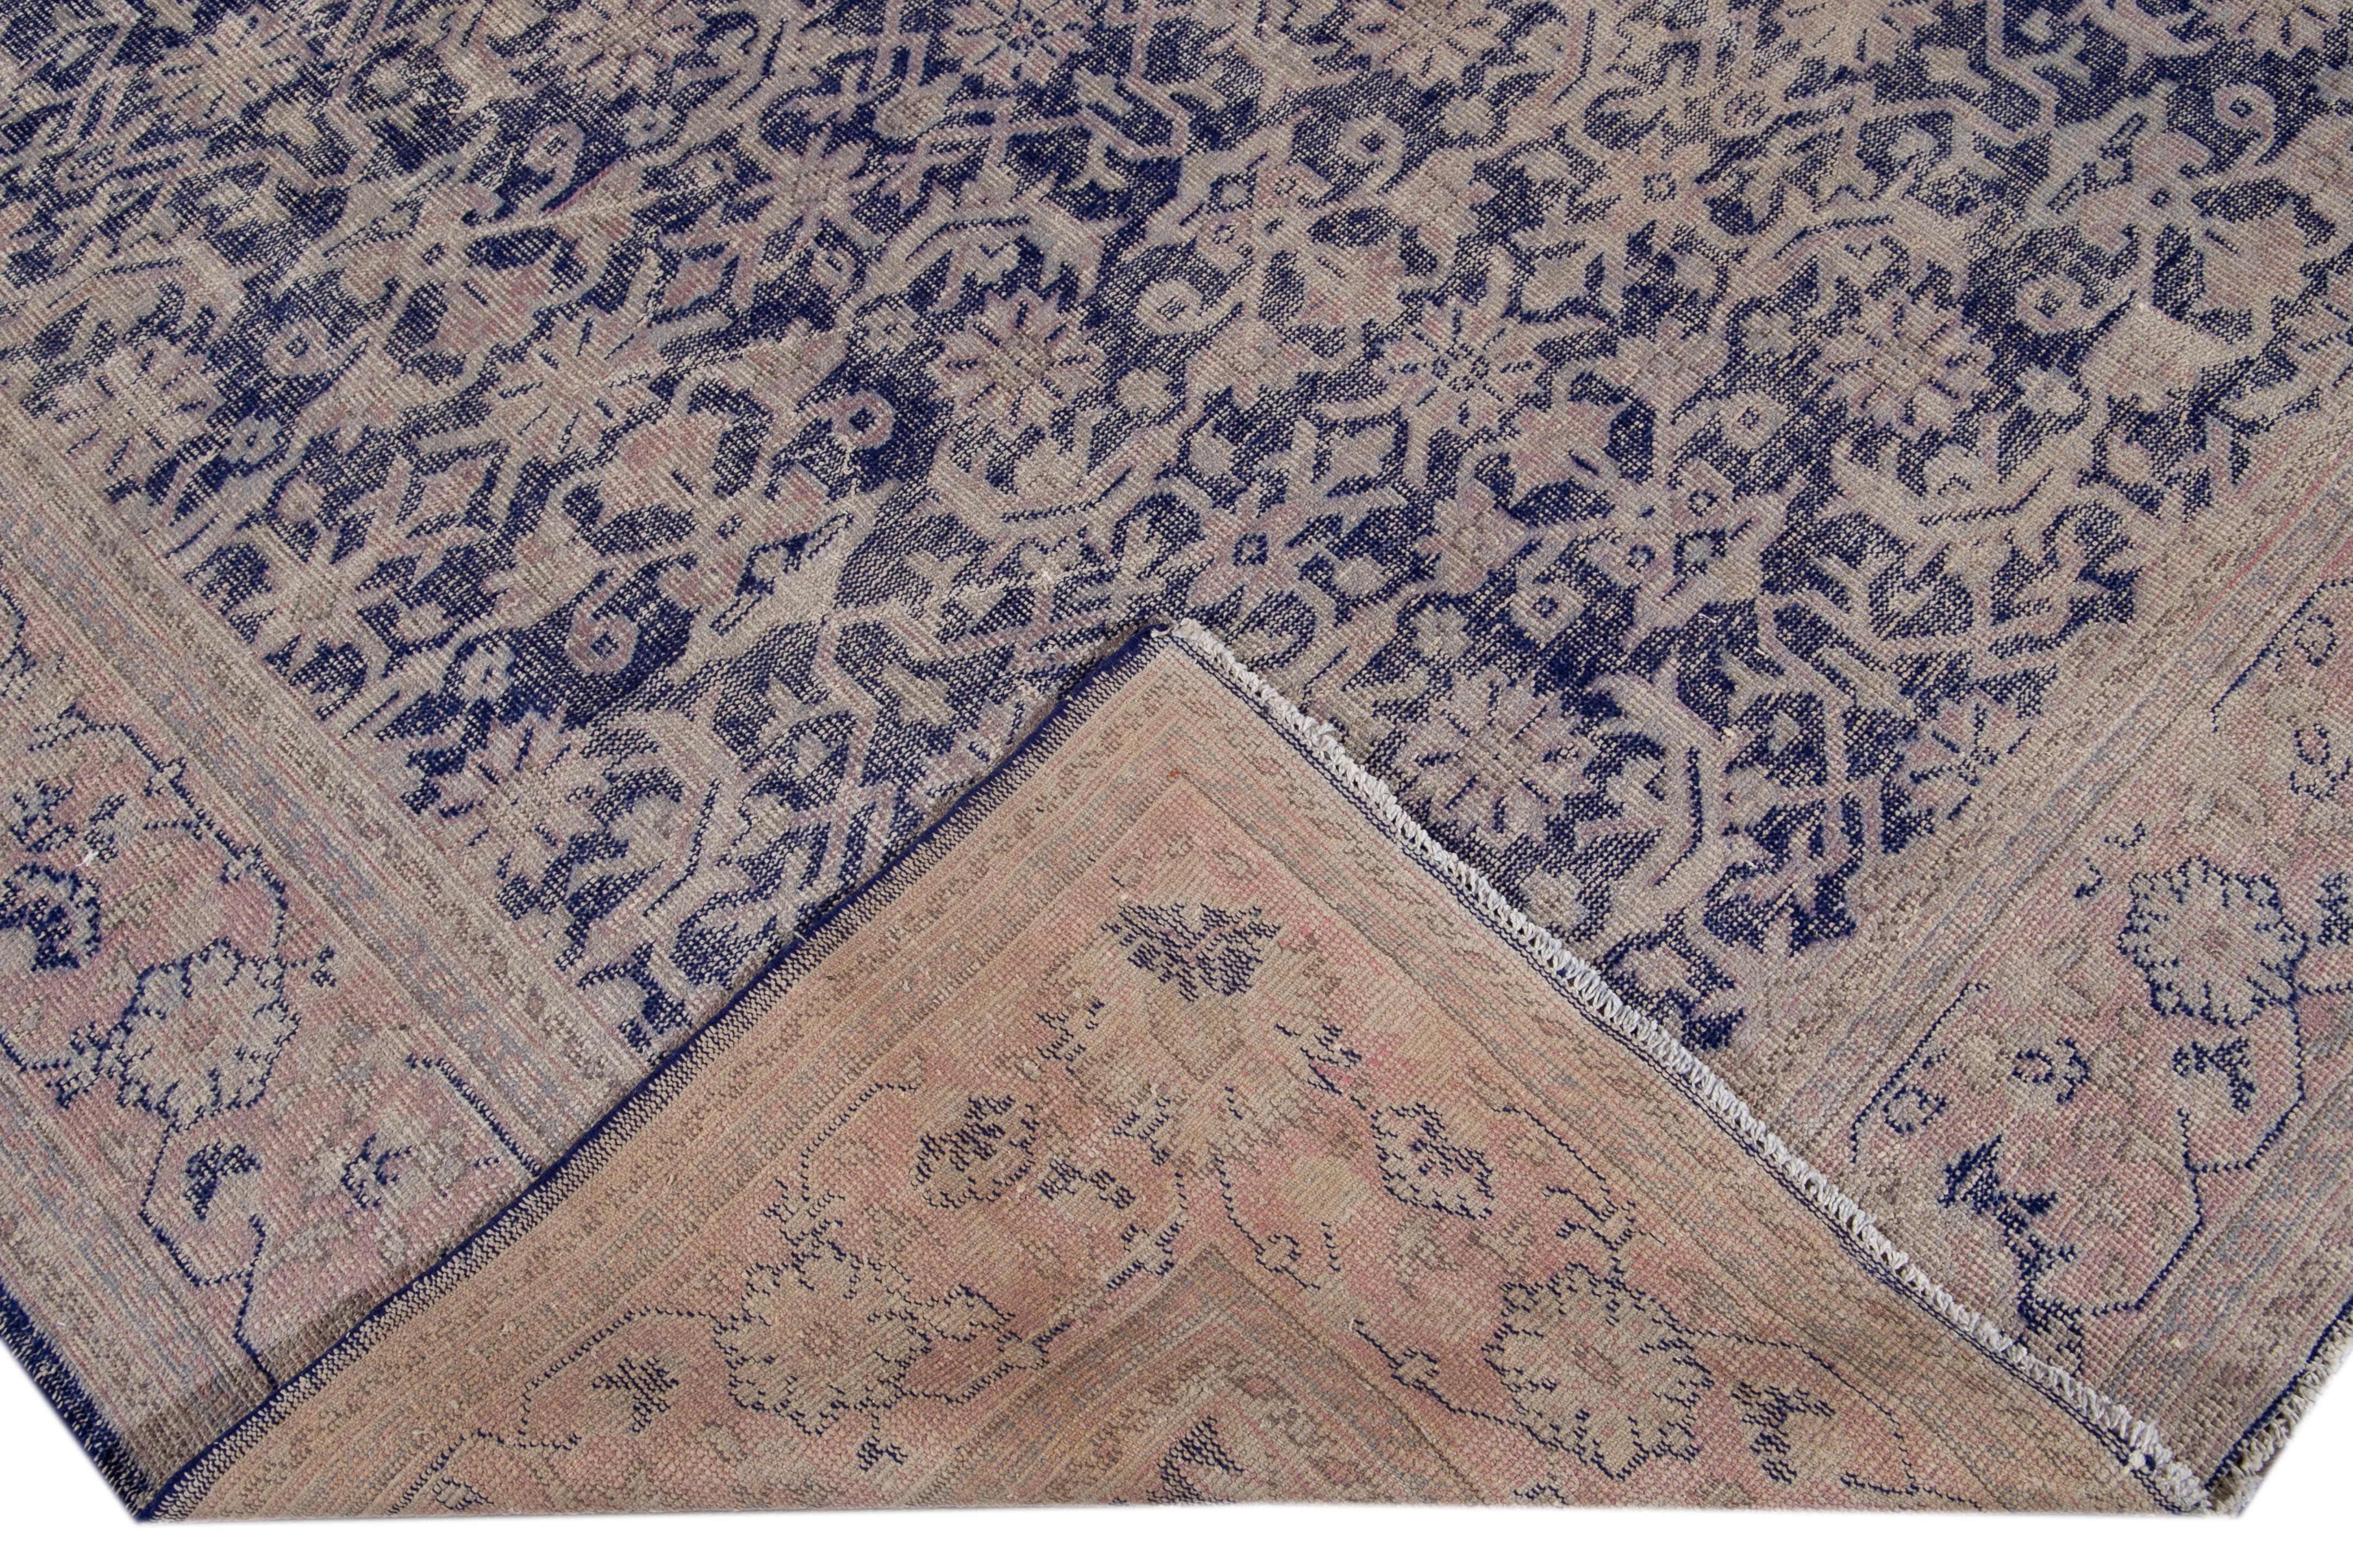 Beautiful antique Malayer hand knotted wool rug with a purple field. This Malayer piece has a pink and beige frame and accents in a gorgeous all-over floral shabby chic design.

This rug measures: 7'3